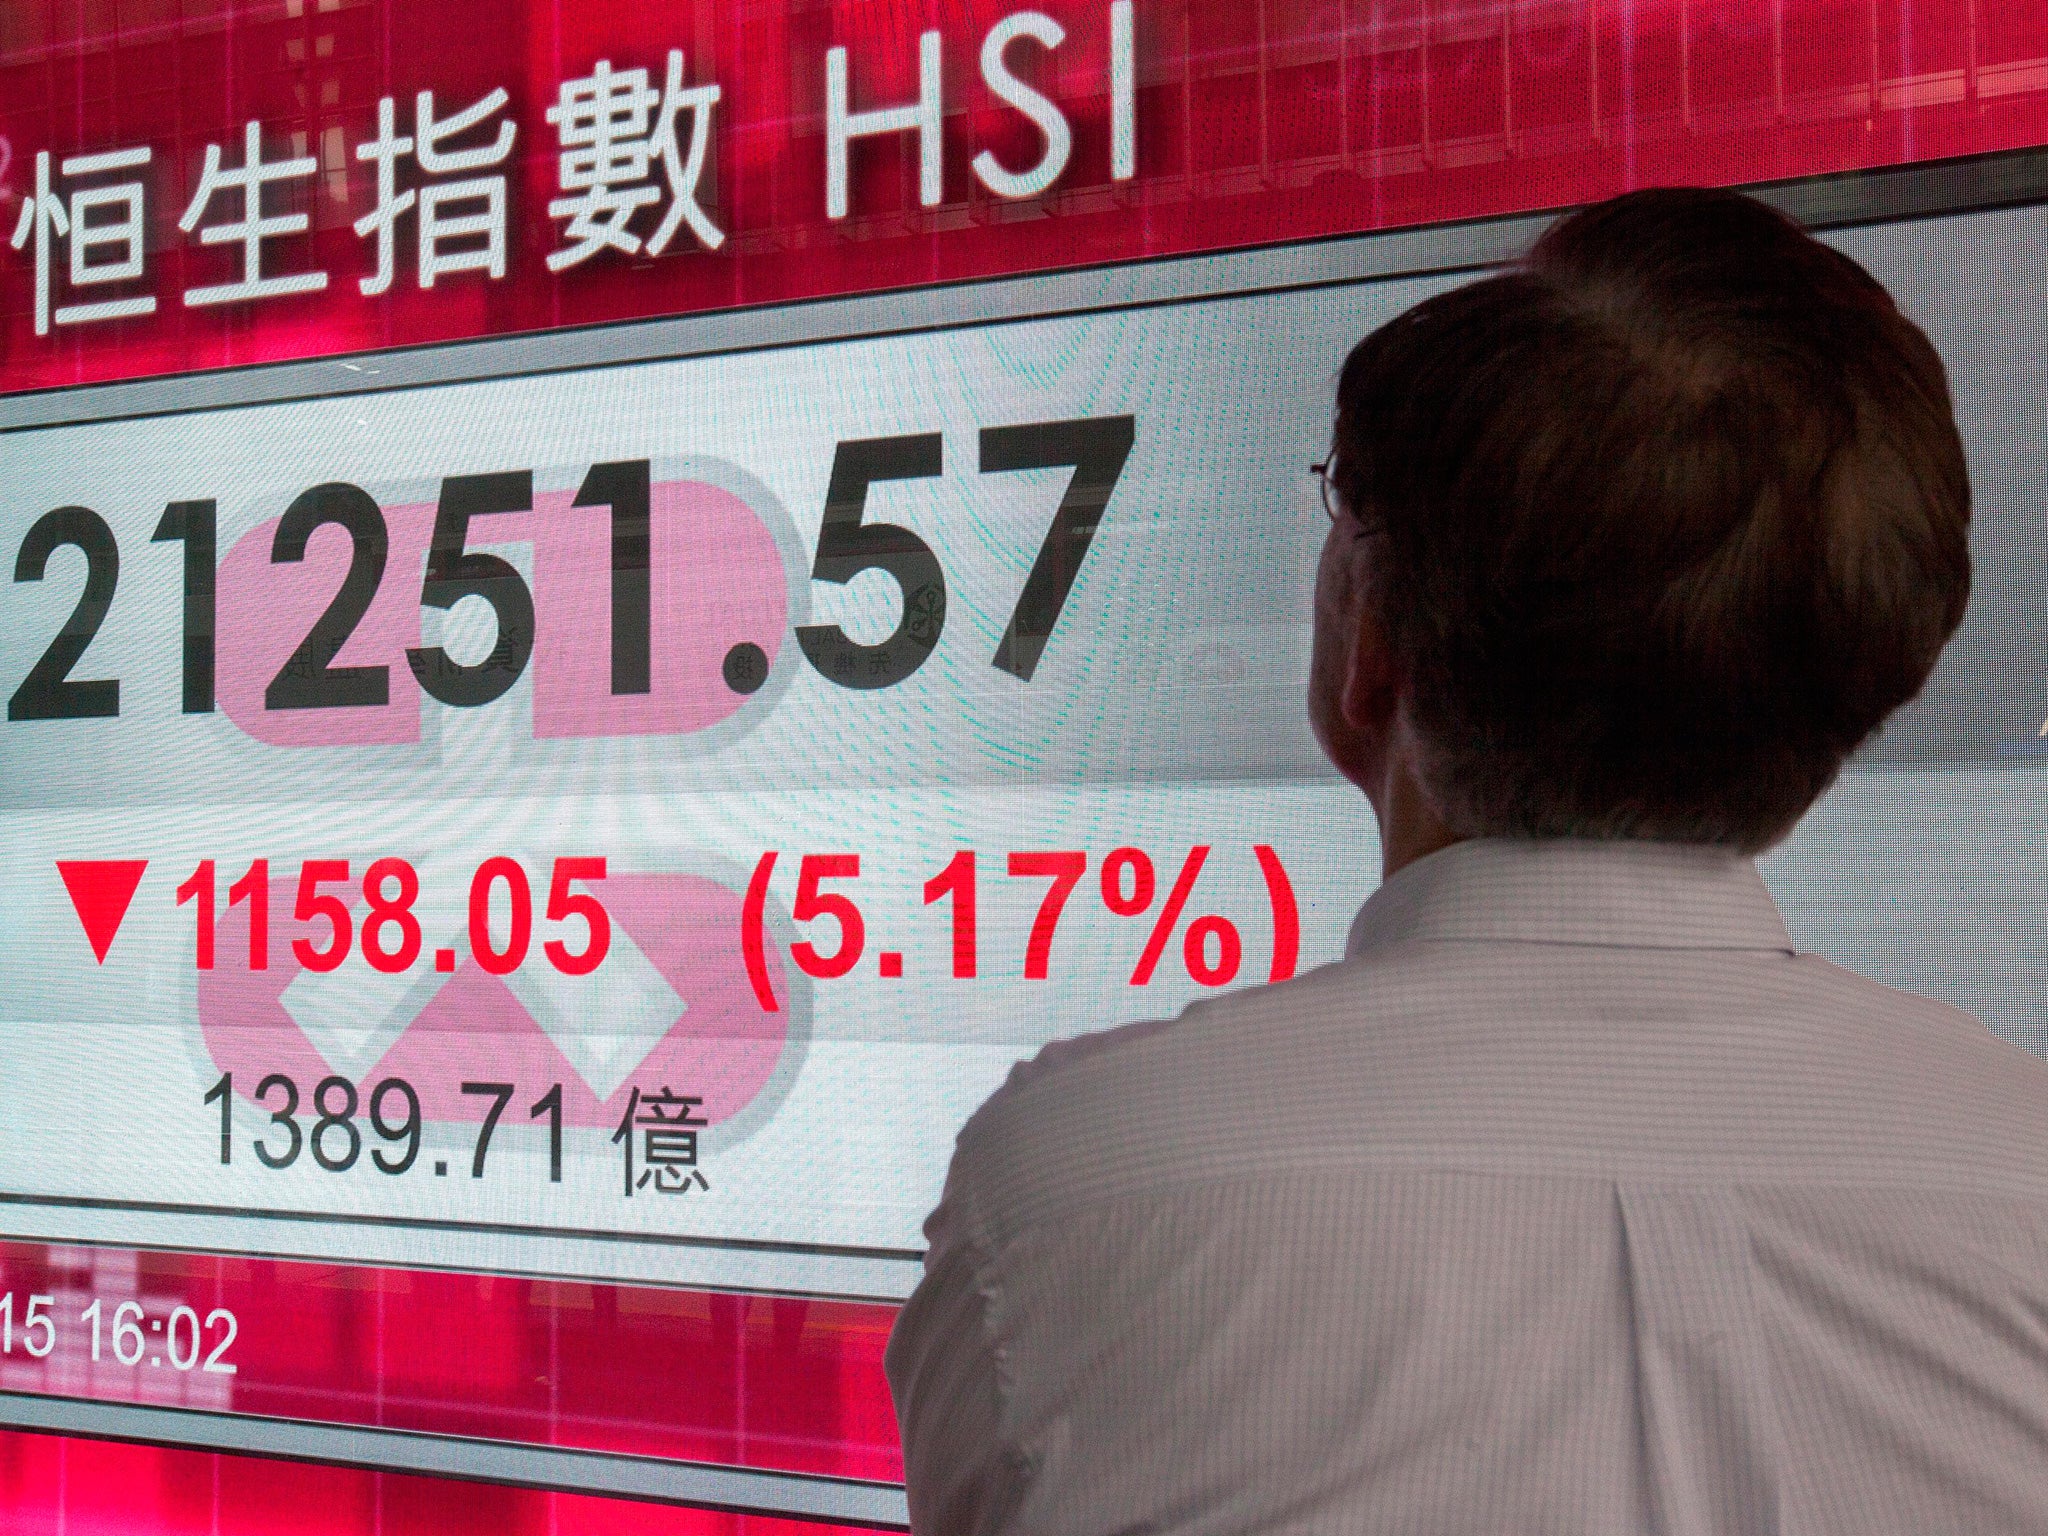 The Hang Seng Index plunged by 1,158.05 points, or 5.17 per cent, after a new wave of panic-selling hit the mainland Chinese stock market (EPA)